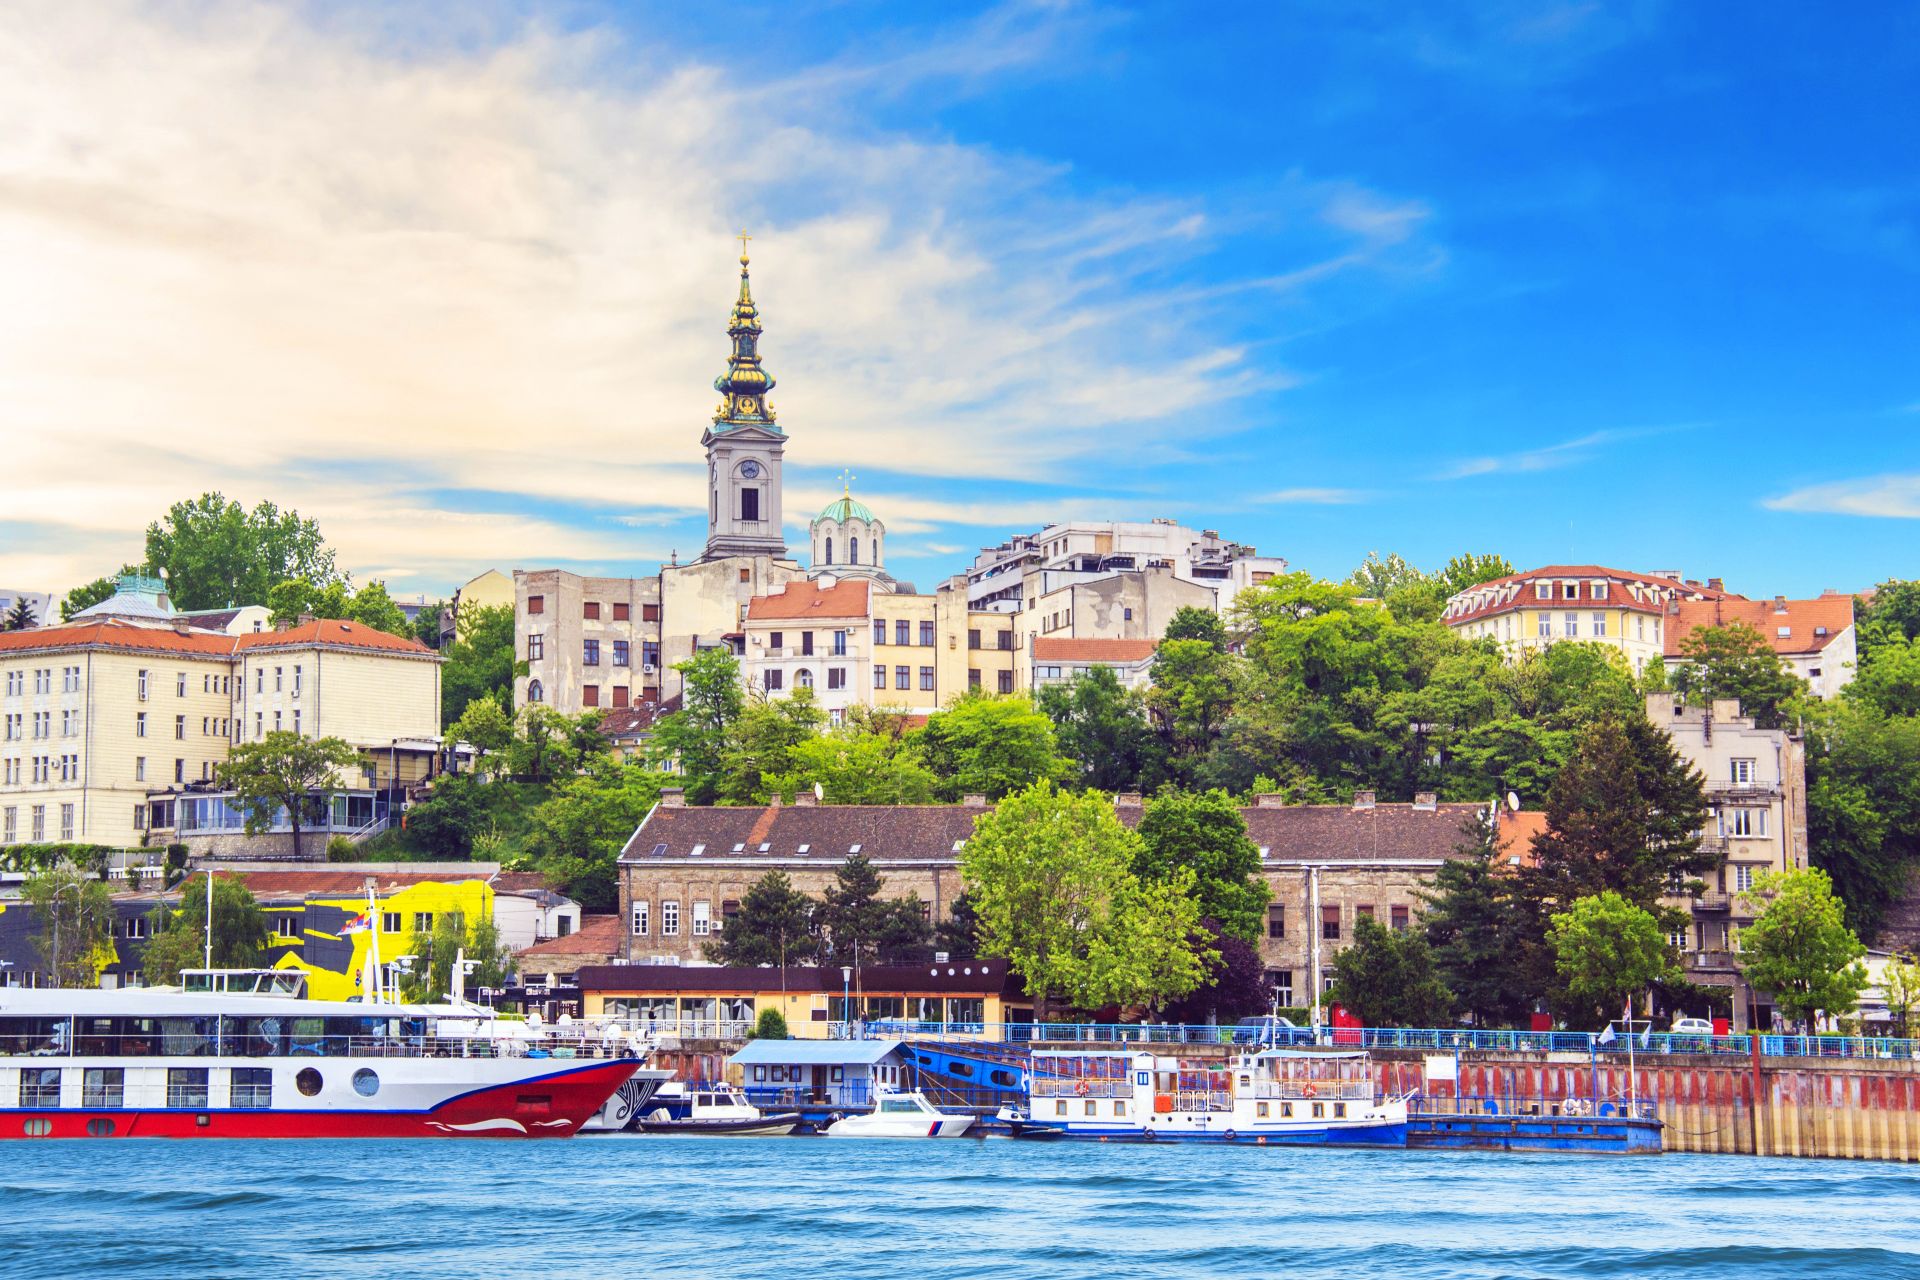 historic center of Belgrade on the banks of the Sava river